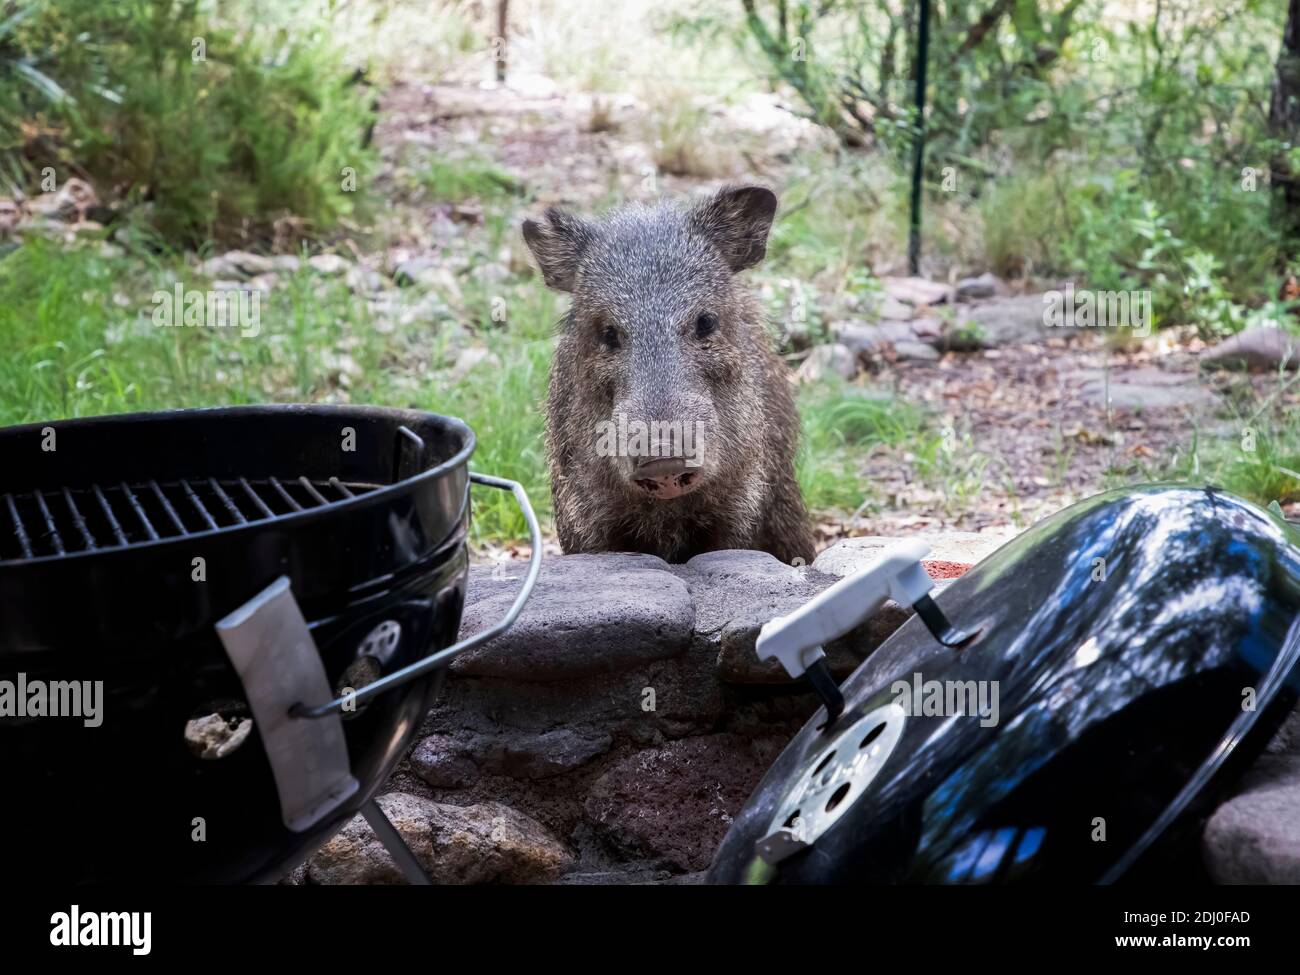 Wild Javalina pig looks reproachfully past barbeque towards camera on porch. Stock Photo